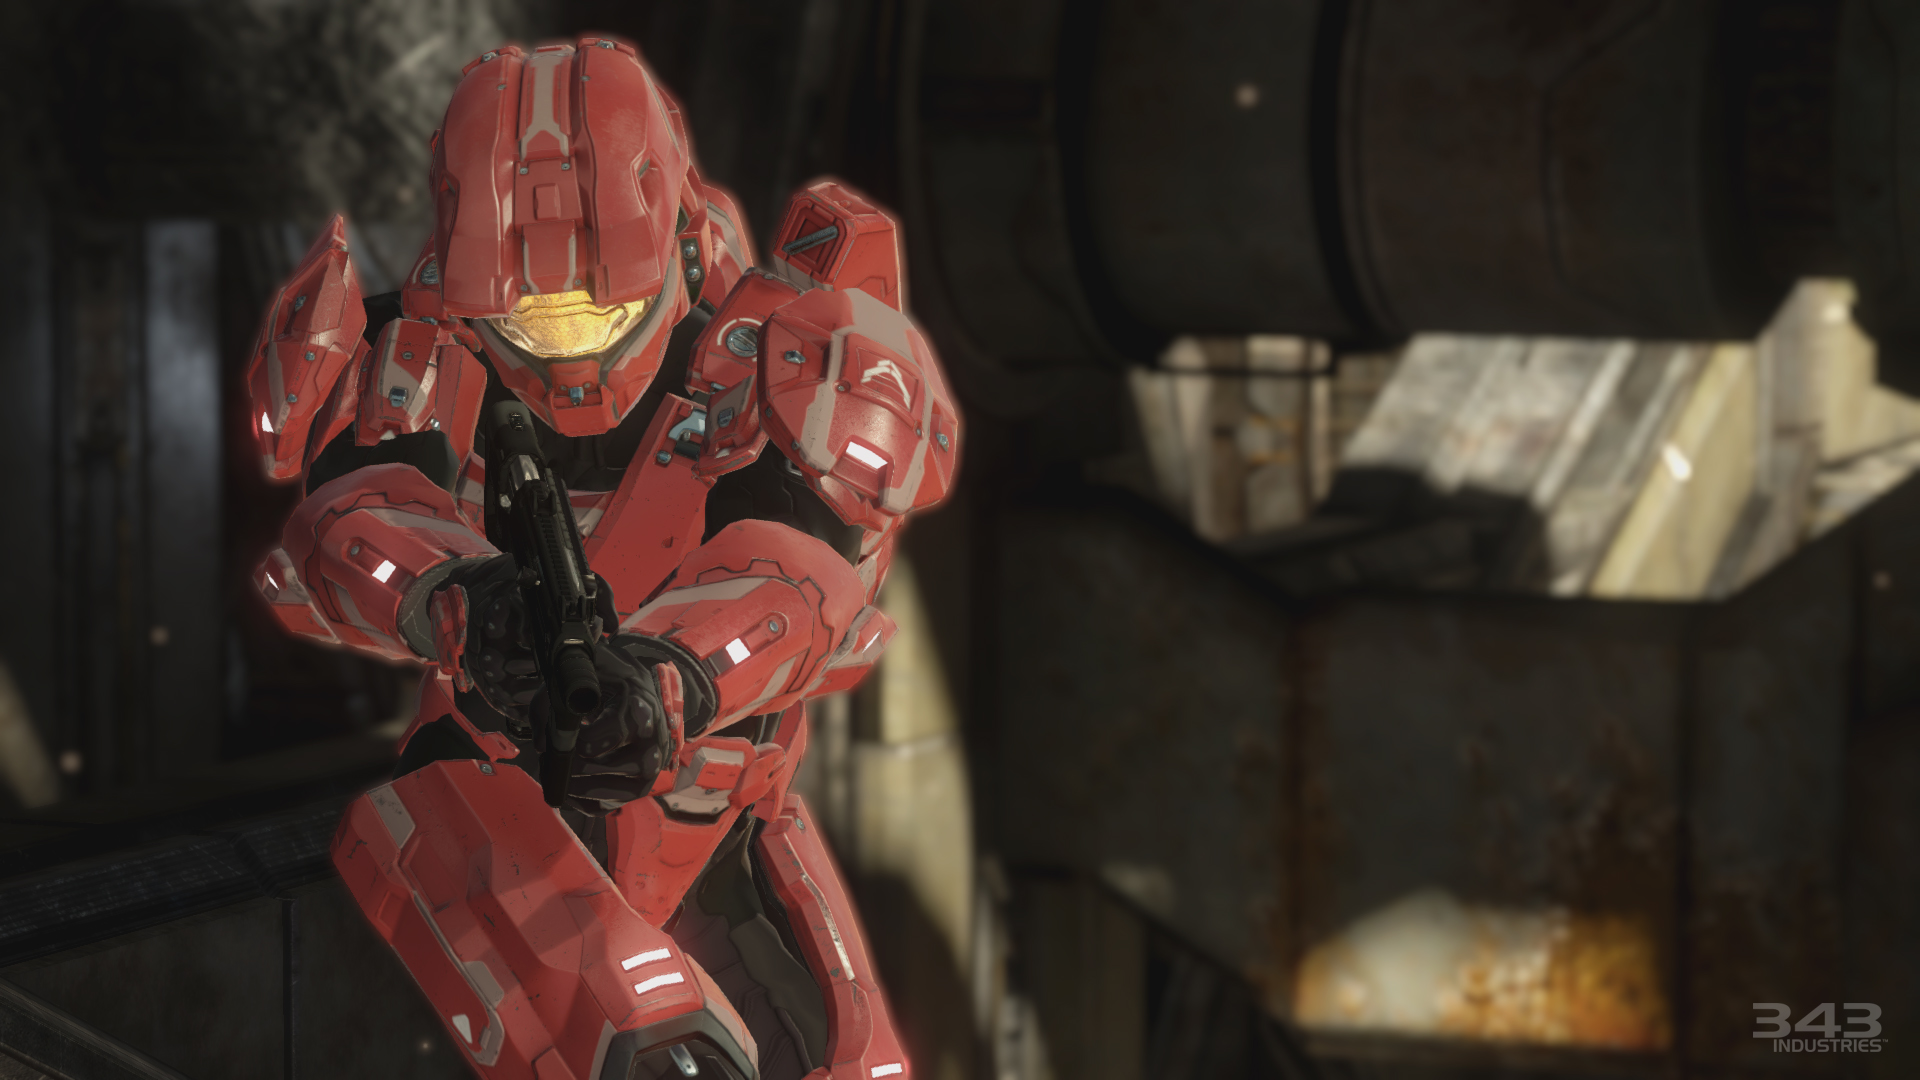 Halo: The Master Chief Collection | Games | Halo - Official Site